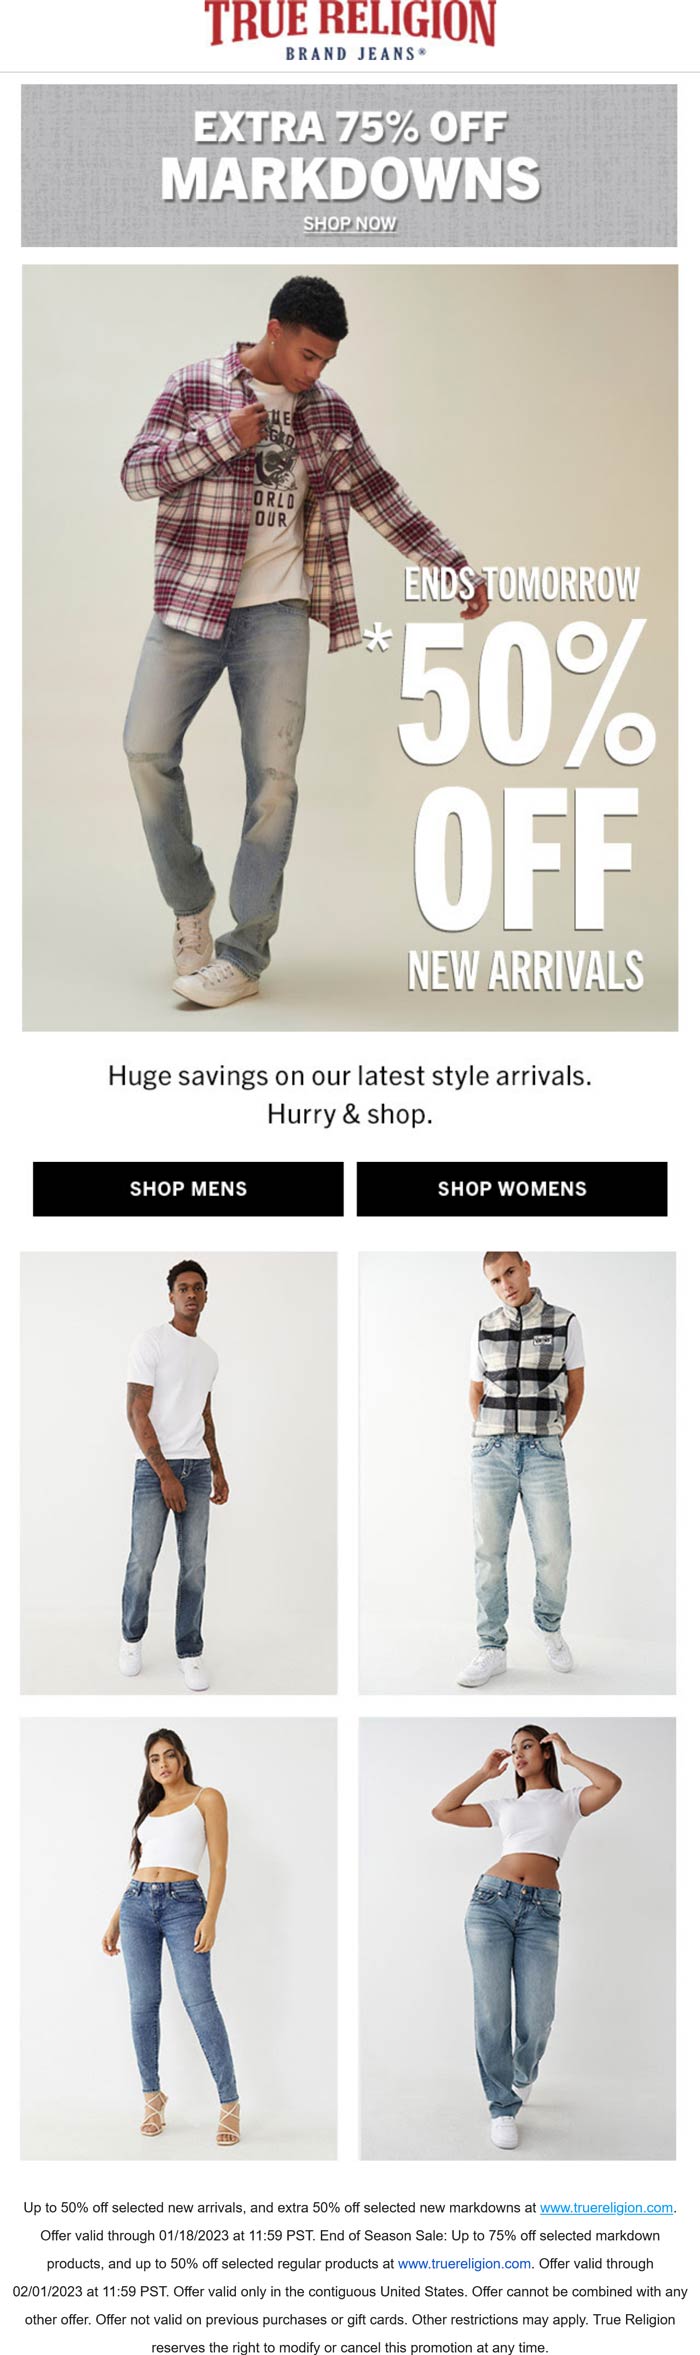 True Religion coupons & promo code for [January 2023]